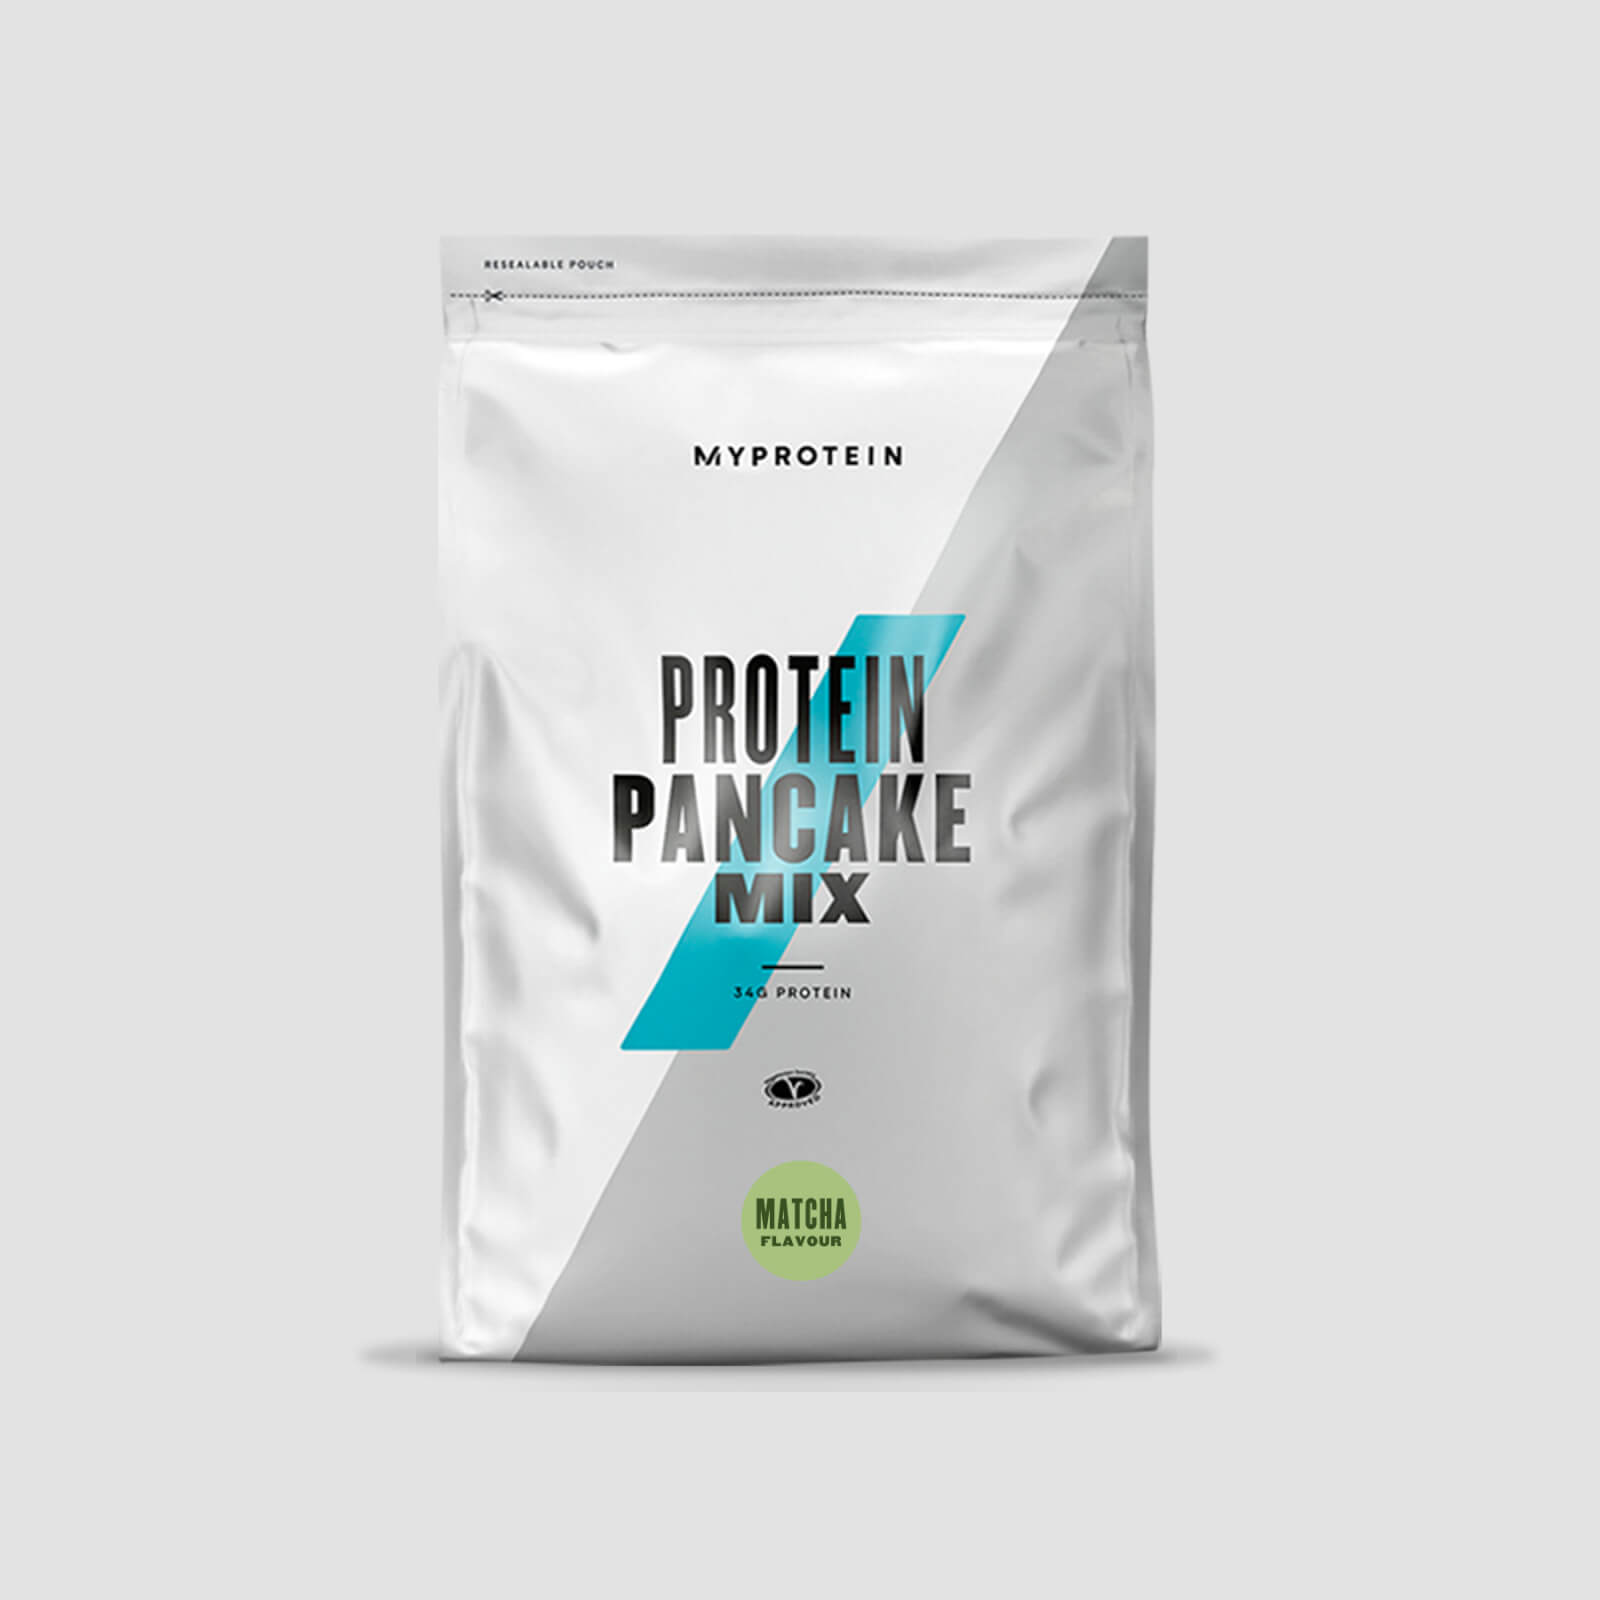 Protein Pancake Mix - 200g - Matcha - New and Improved